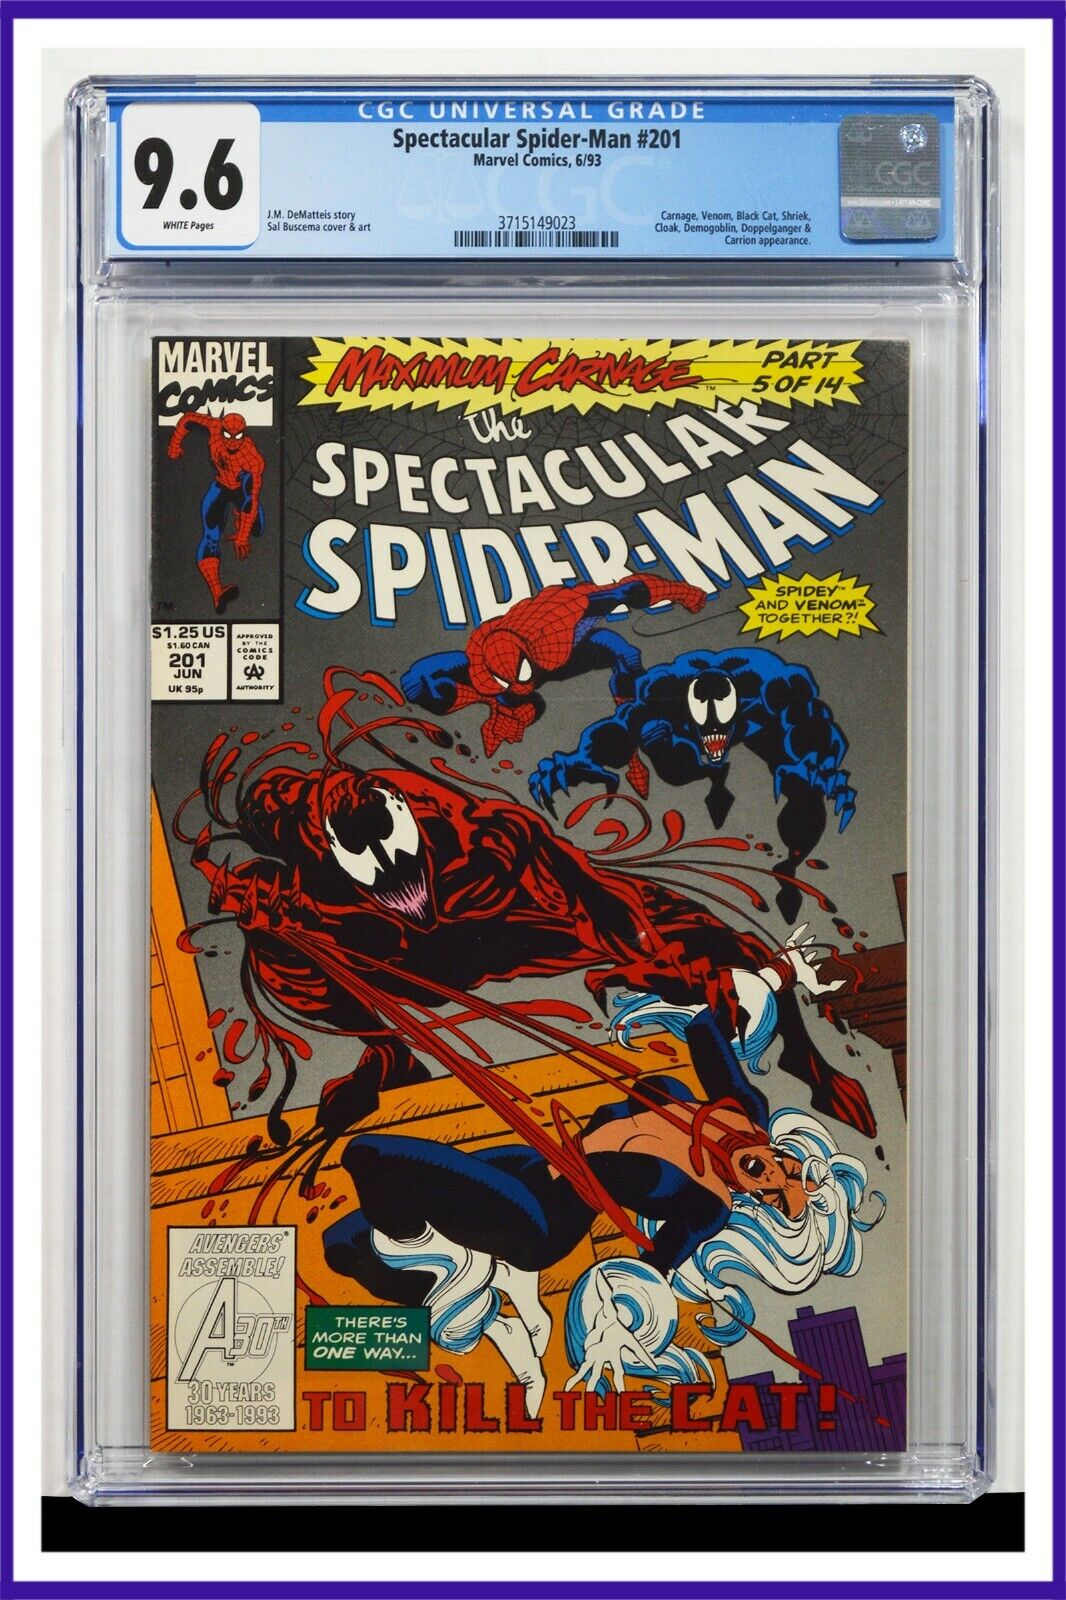 Spectacular Spider-Man #201 CGC Graded 9.6 Marvel 1993 White Pages Comic Book.